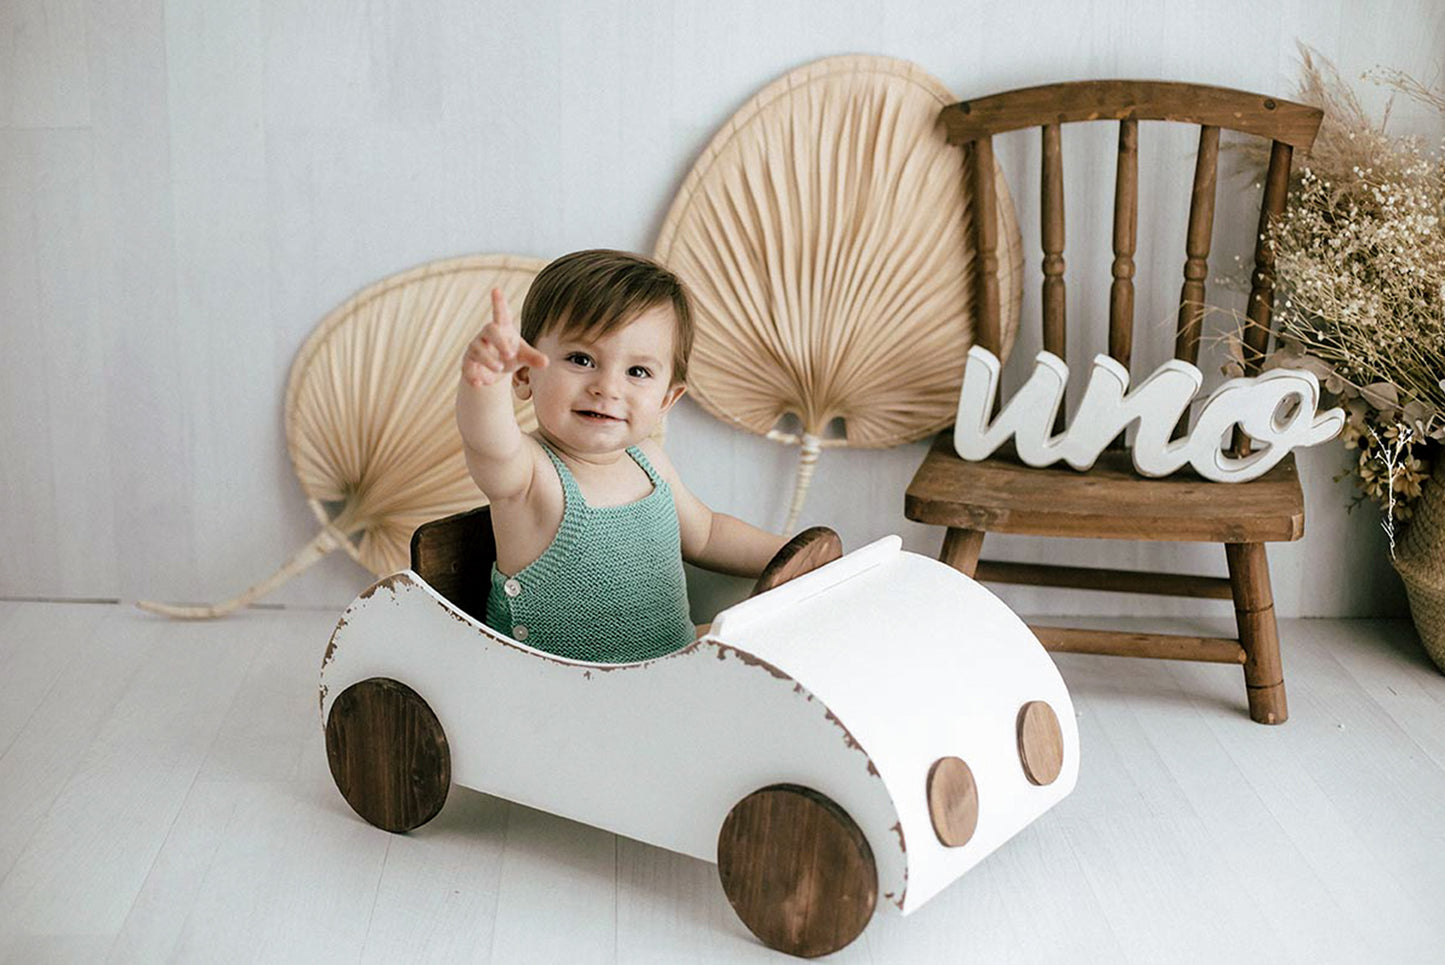 VW White Rustic Wooden Convertible Car for Newborn Photography by Newborn Studio Props